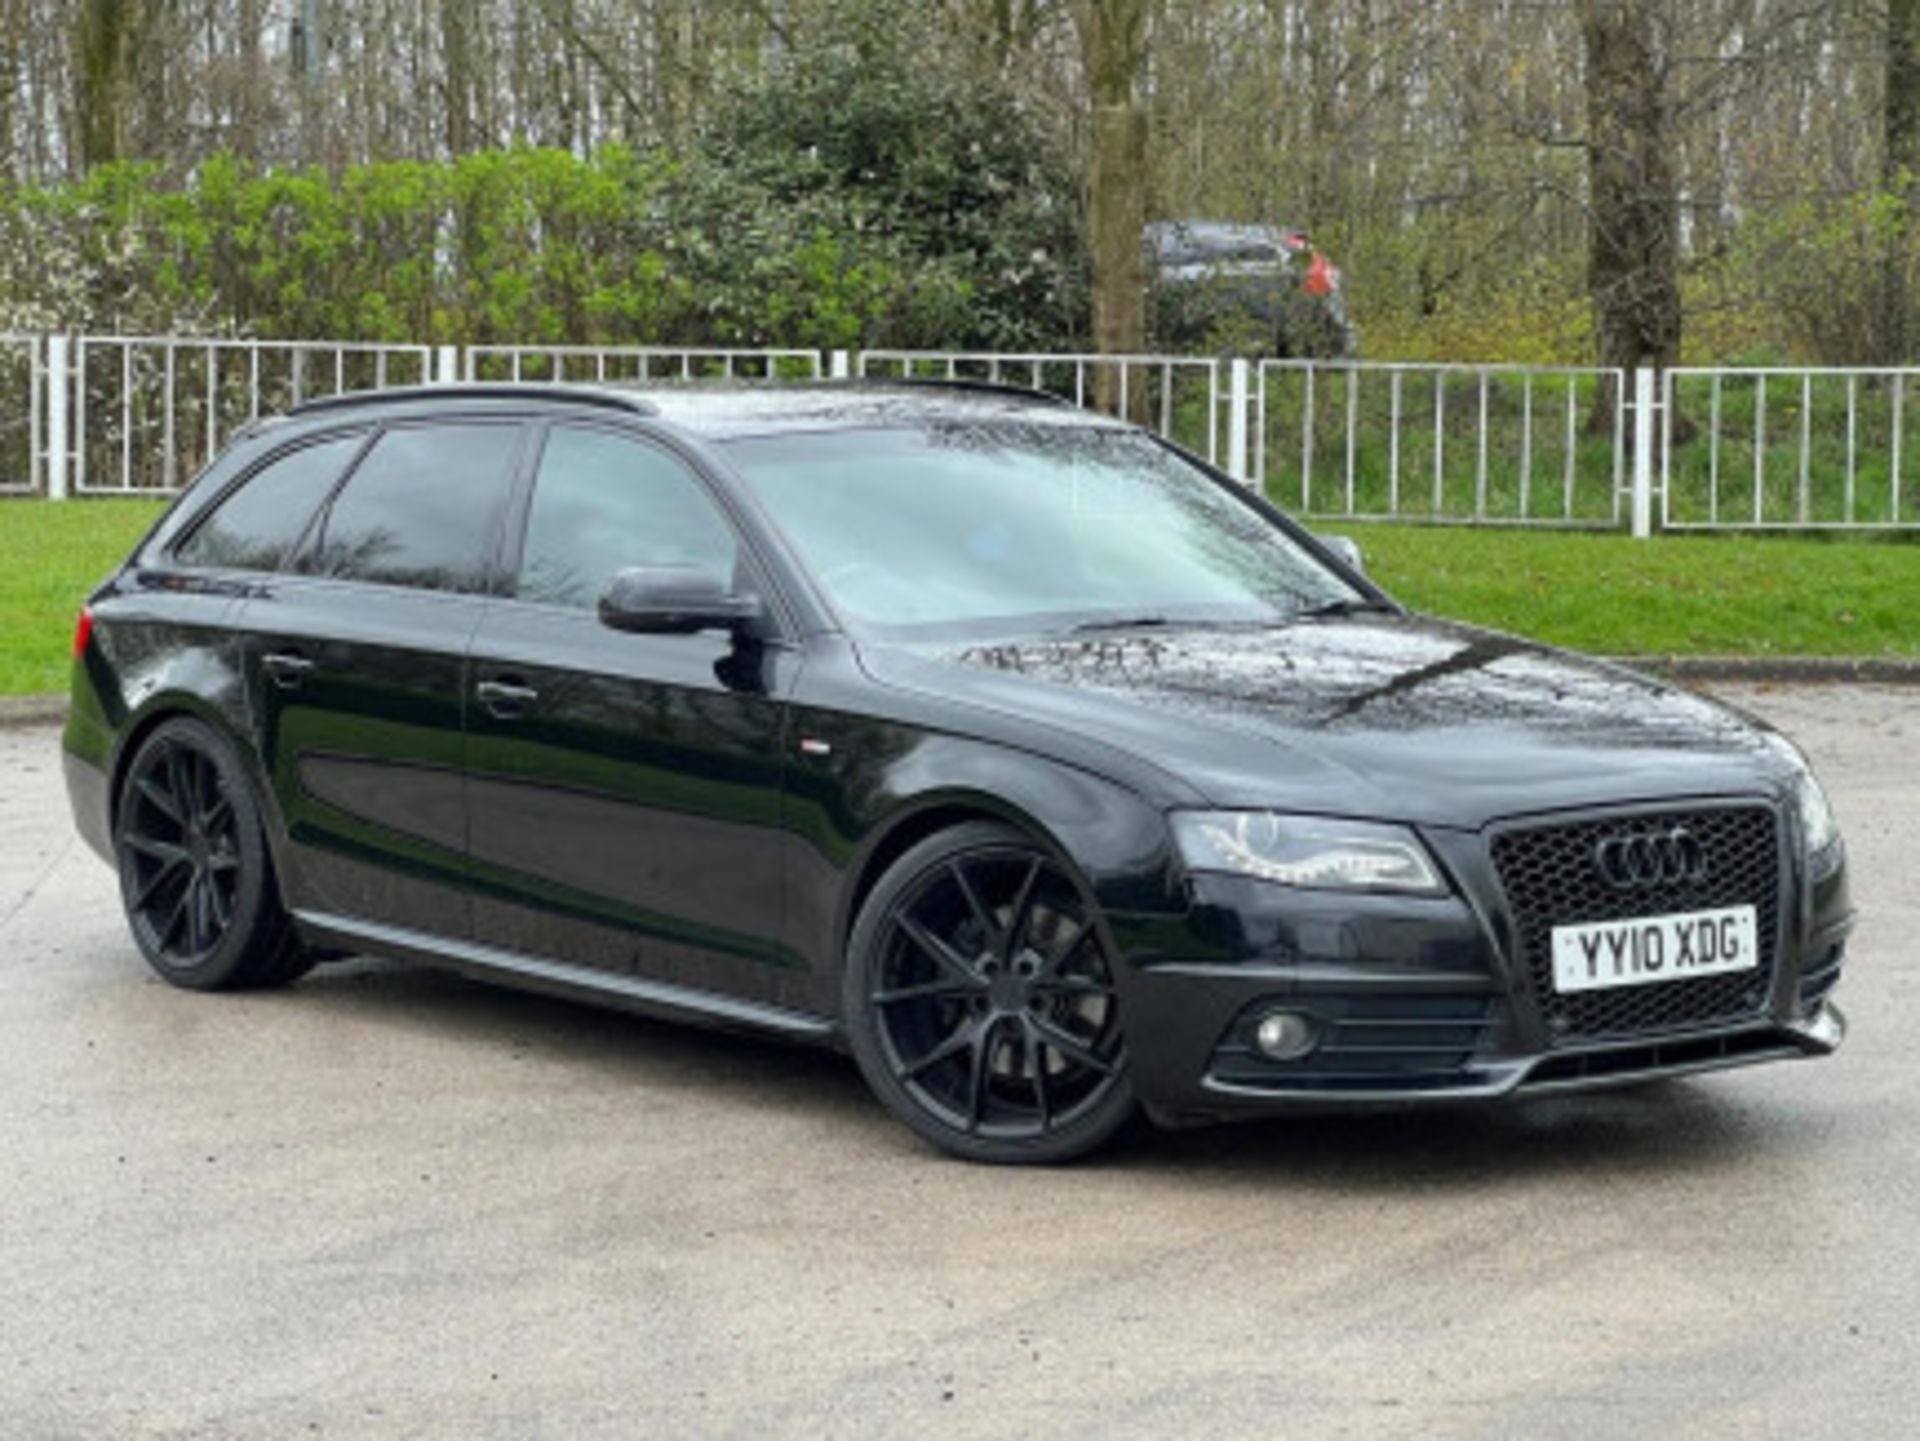 2010 AUDI A4 AVANT 2.0 TFSI S LINE SPECIAL EDITION S TRONIC QUATTRO >>--NO VAT ON HAMMER--<< - Image 59 of 115